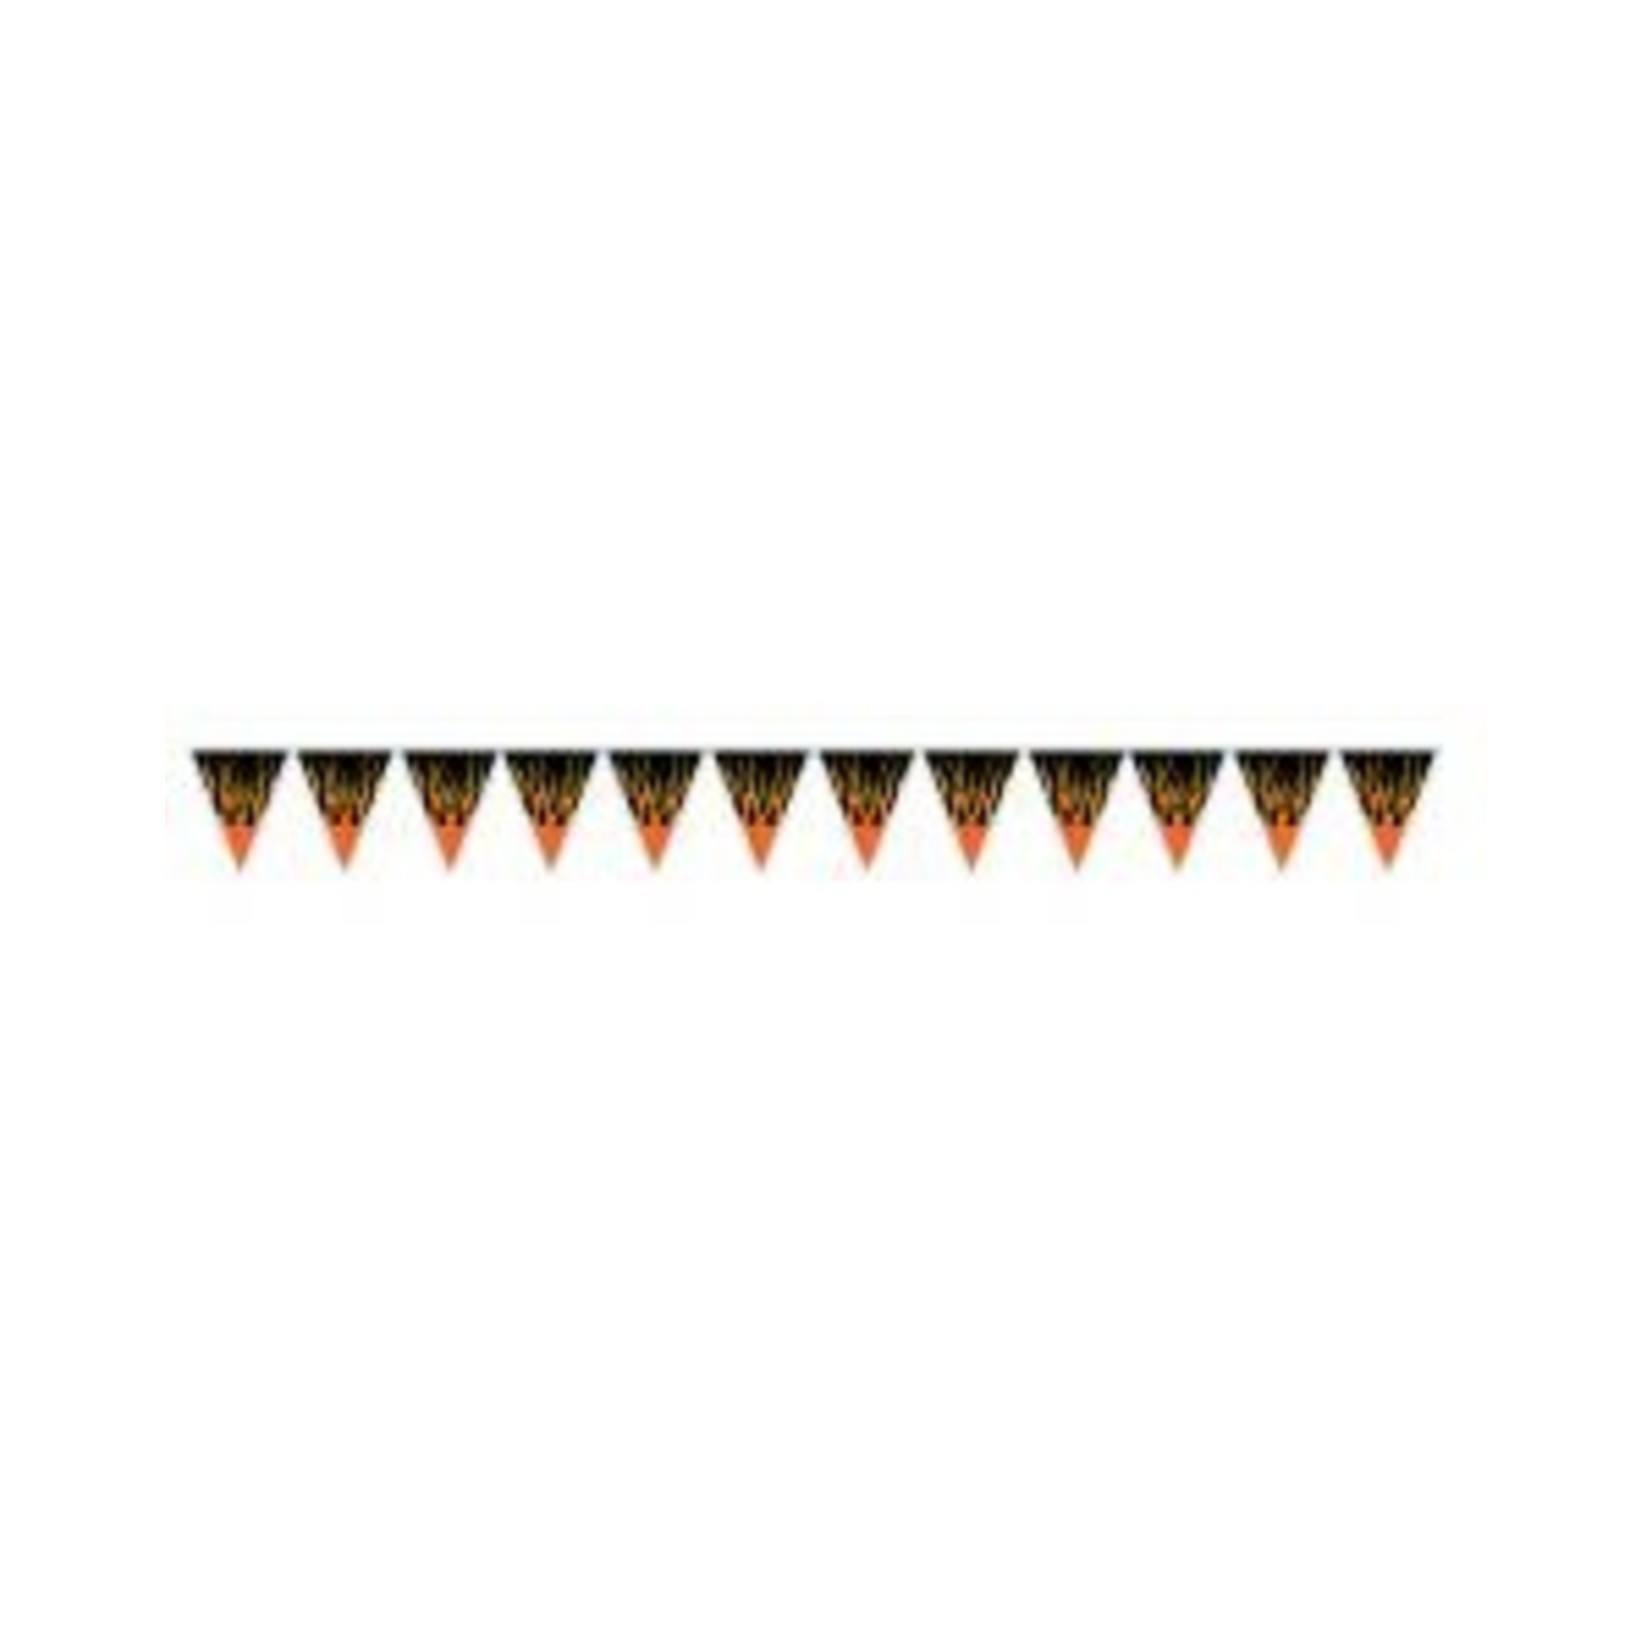 Beistle Flame Pennant Banner - 12'